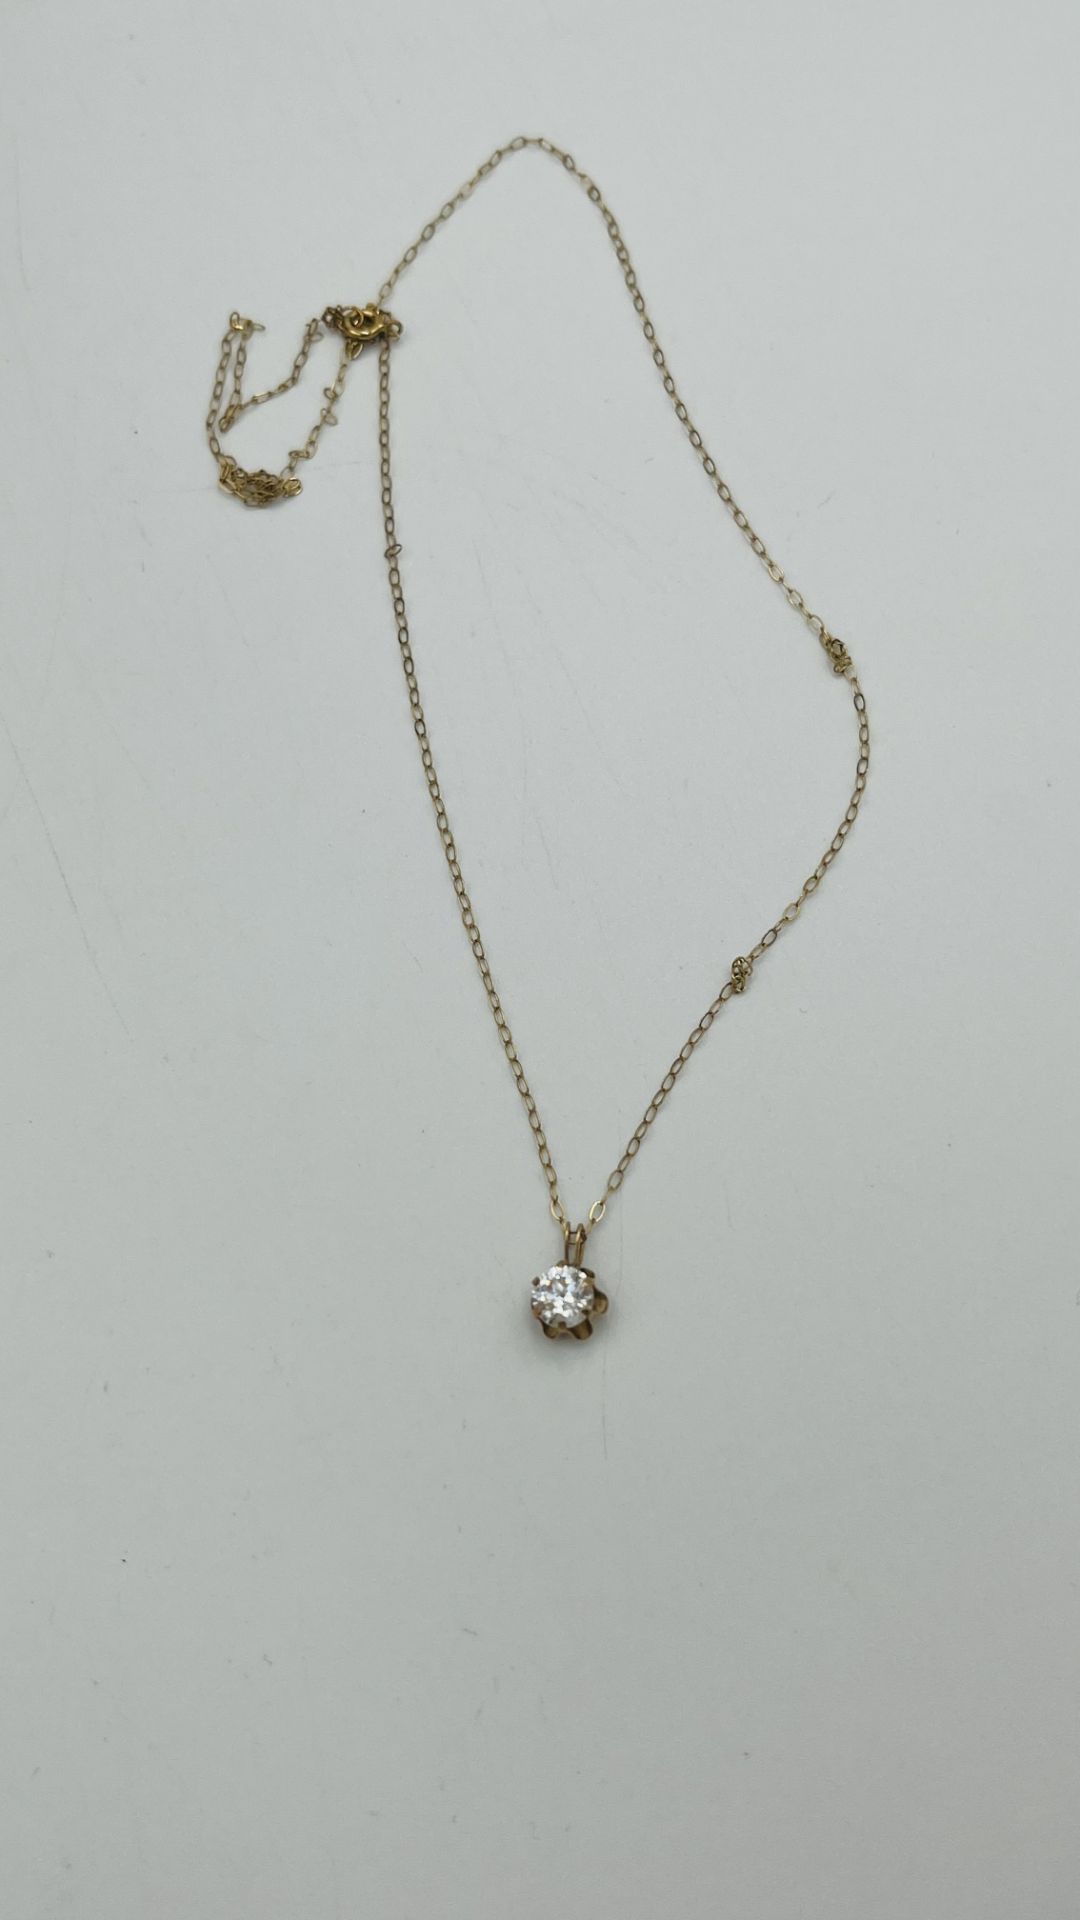 9ct gold necklace, ring and pendant necklace - Image 6 of 6